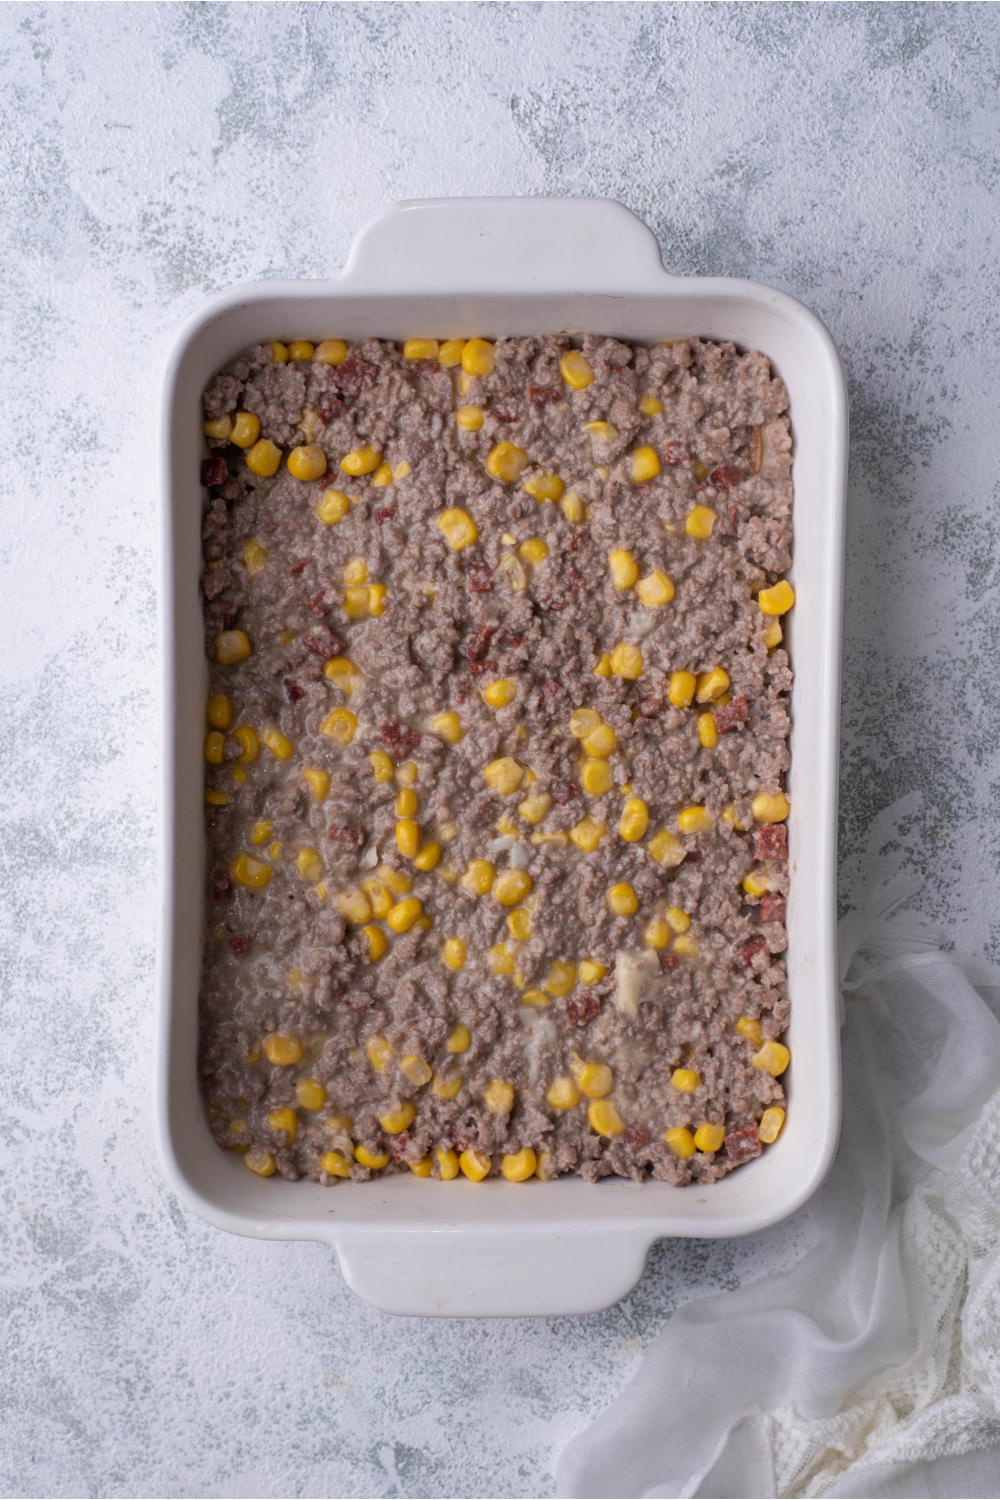 White baking dish layered with cooked ground beef and corn in a creamy sauce.